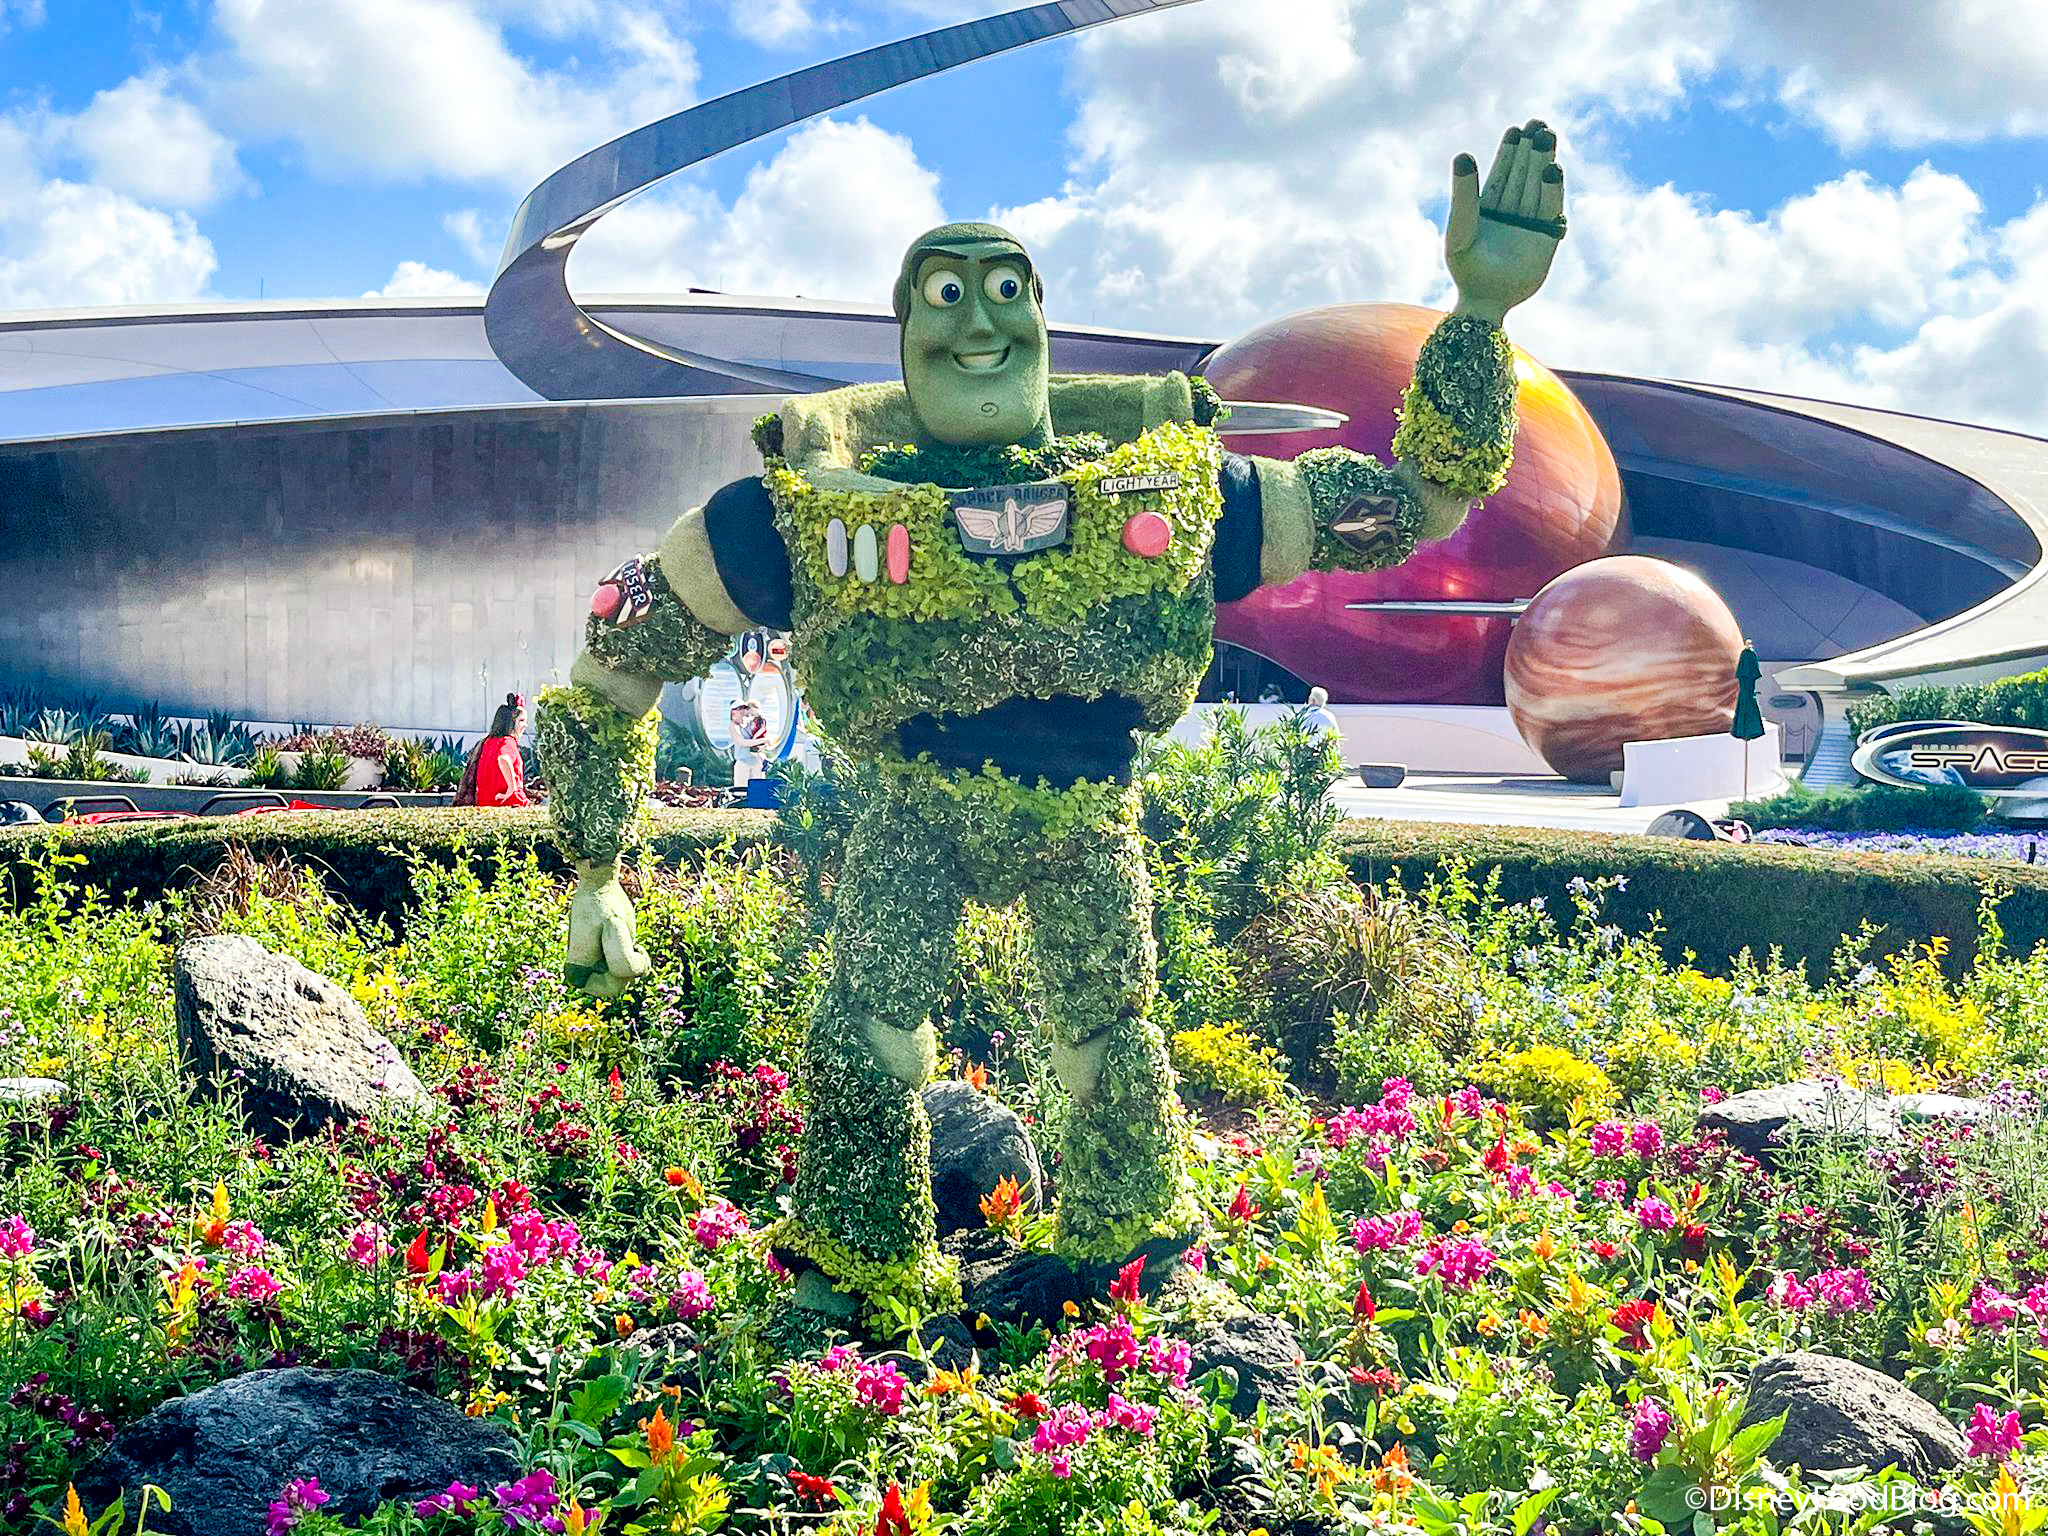 https://www.disneyfoodblog.com/wp-content/uploads/2022/02/buzz-lightyear-topiary-mission-space-epcot-flower-and-garden-1.jpg